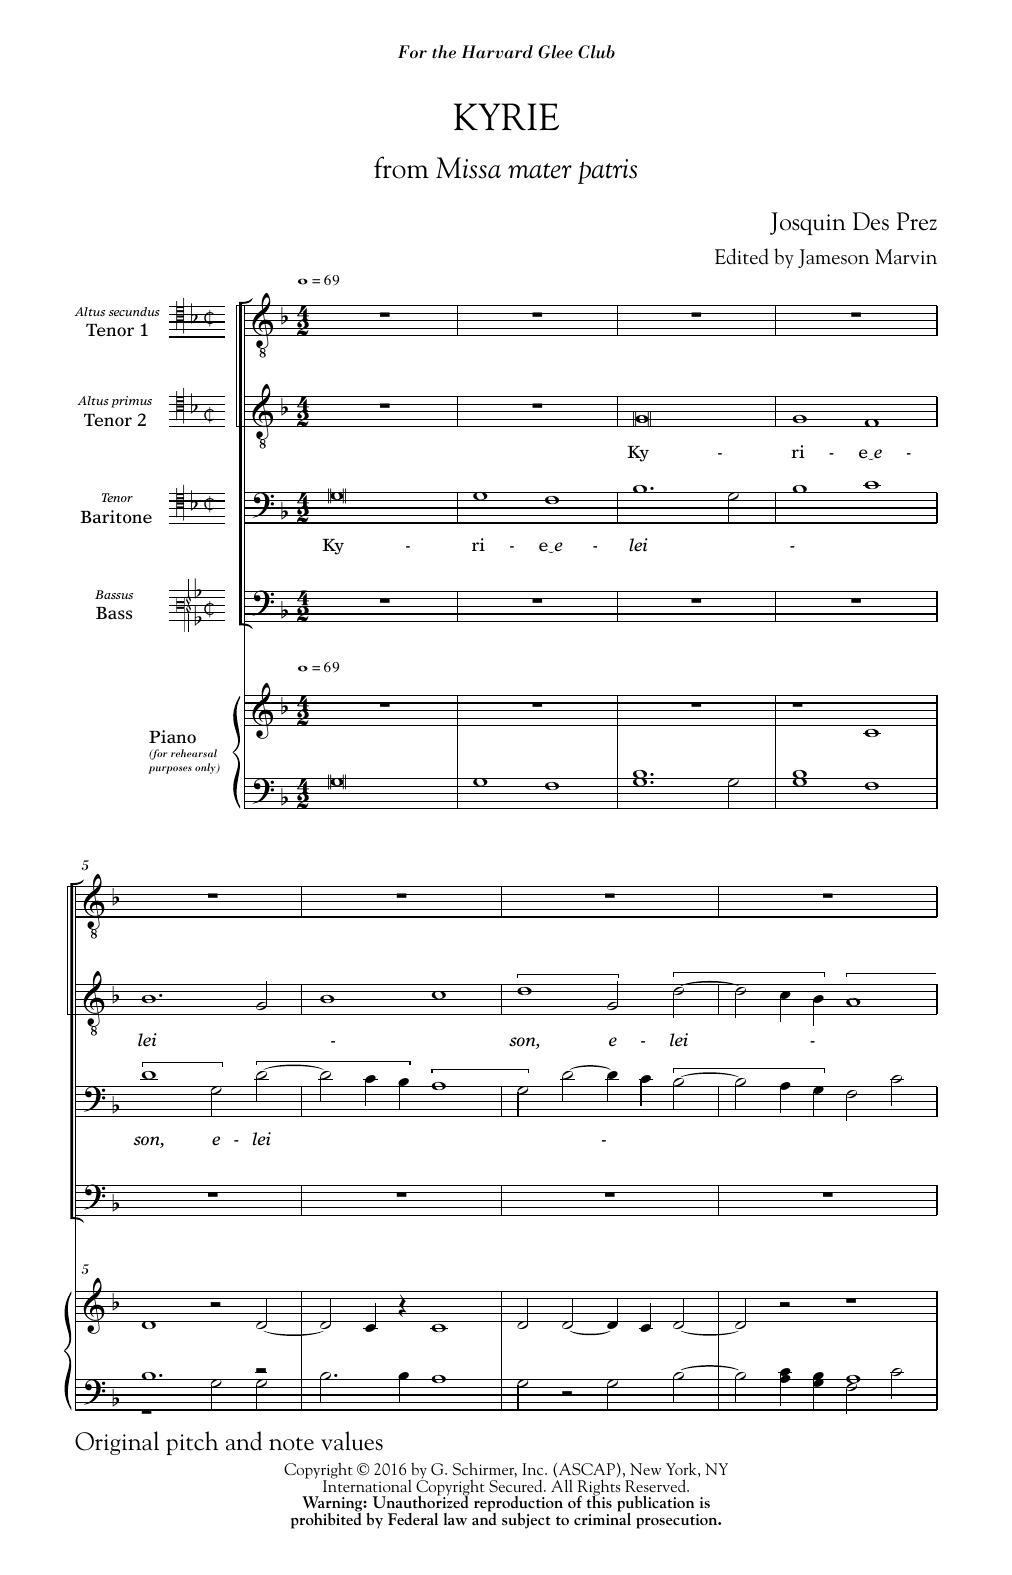 Download Jameson Marvin Kyrie Sheet Music